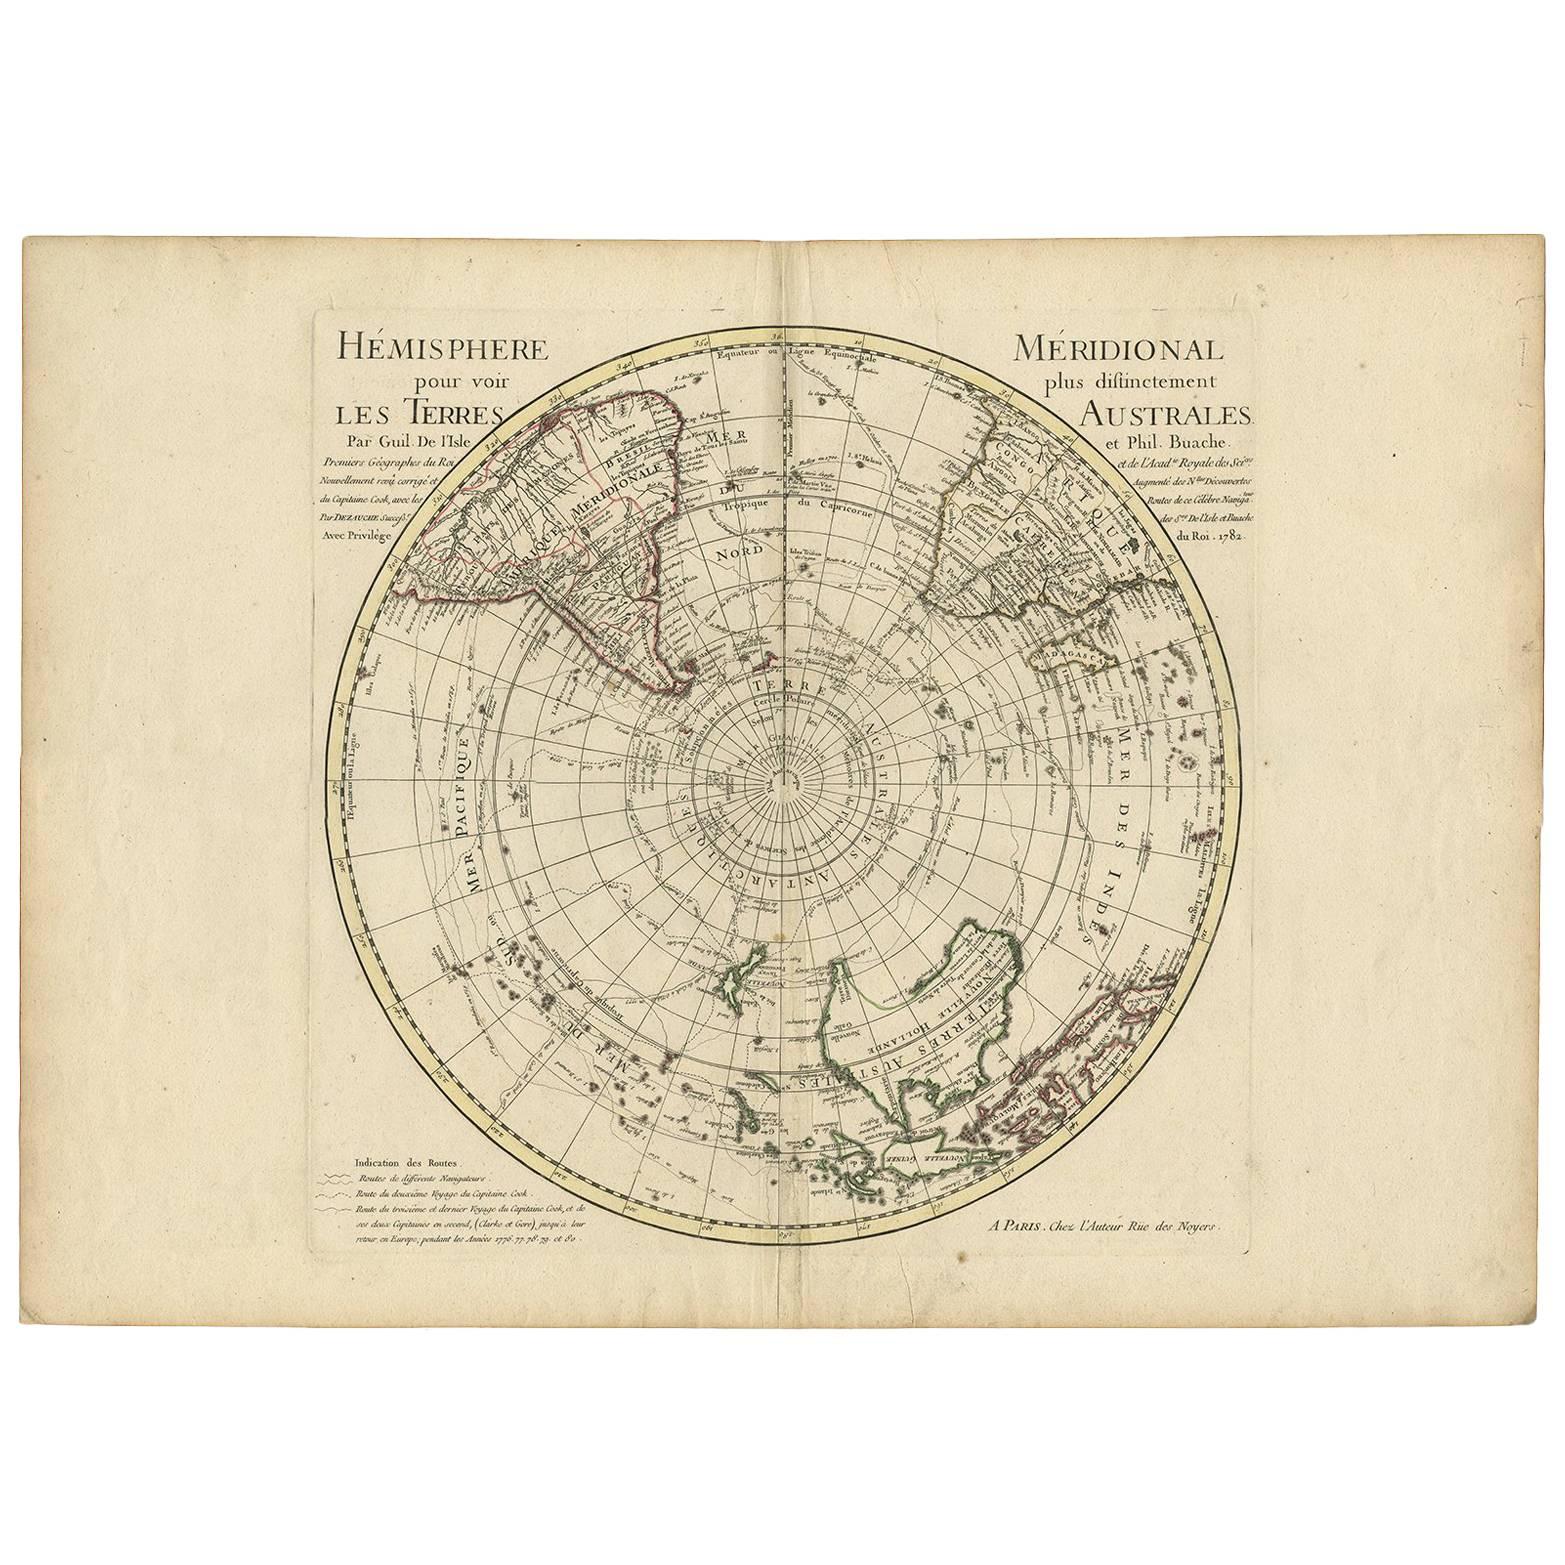 18th Century Antique Engraving of the Southern Hemisphere by G. de L'Isle